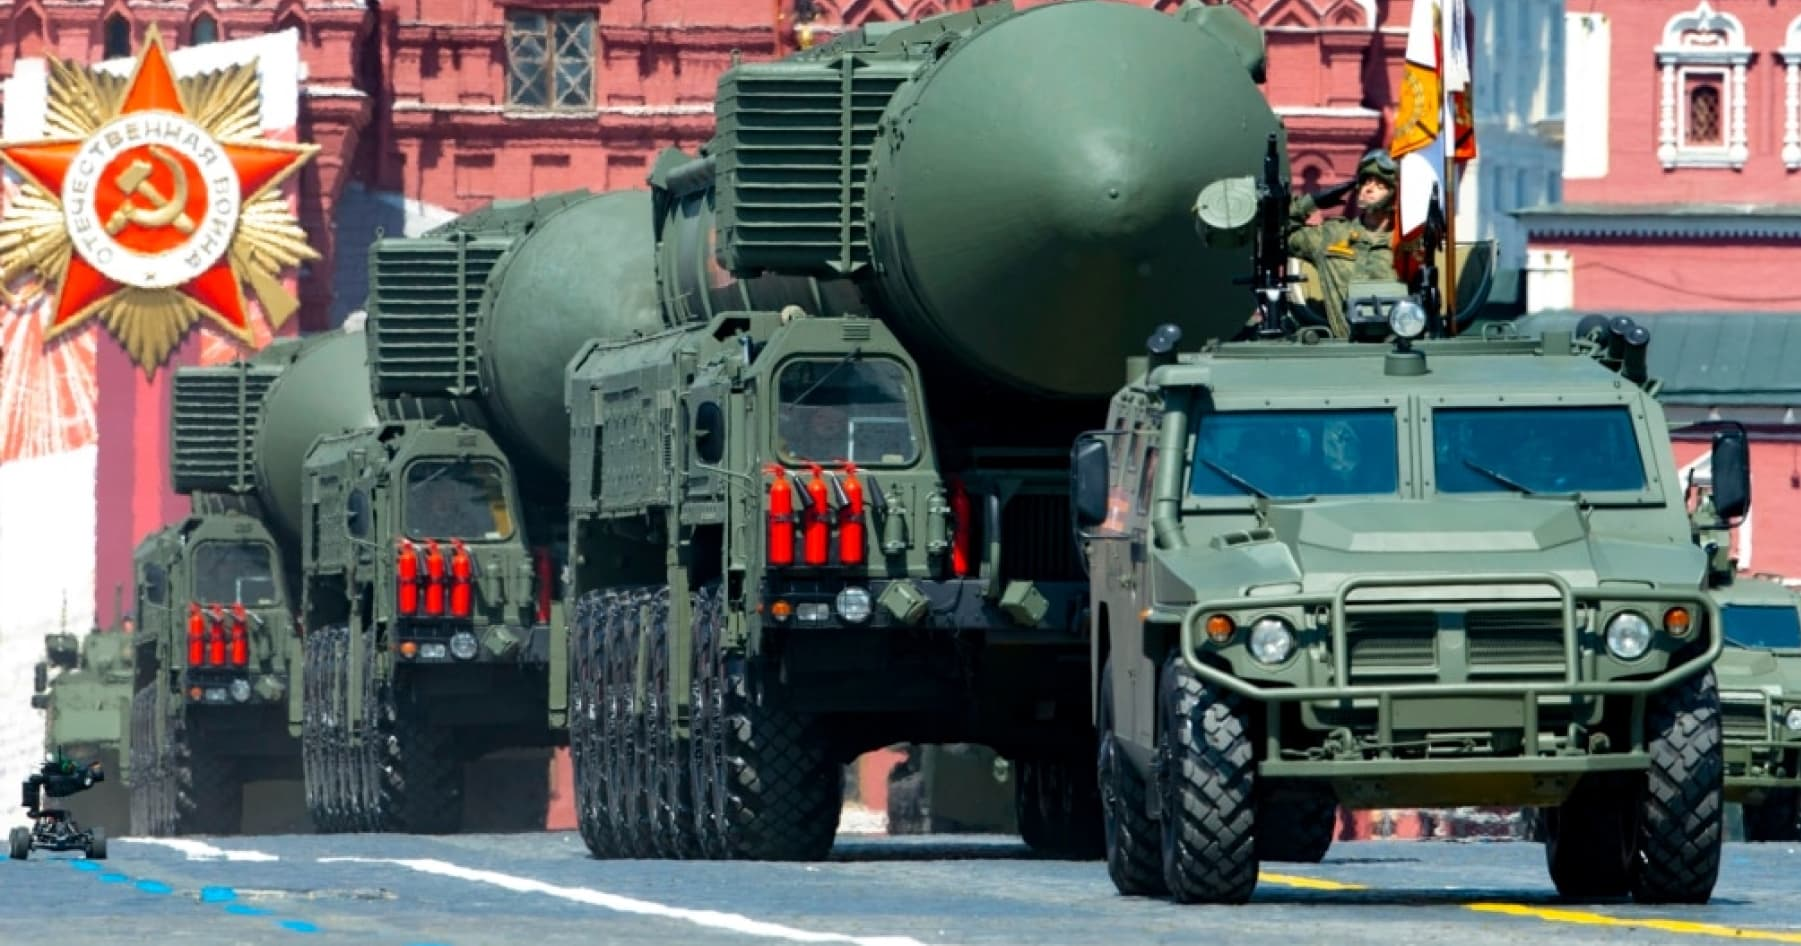 Currently, the United States sees no signs of Russia's preparations to use nuclear weapons